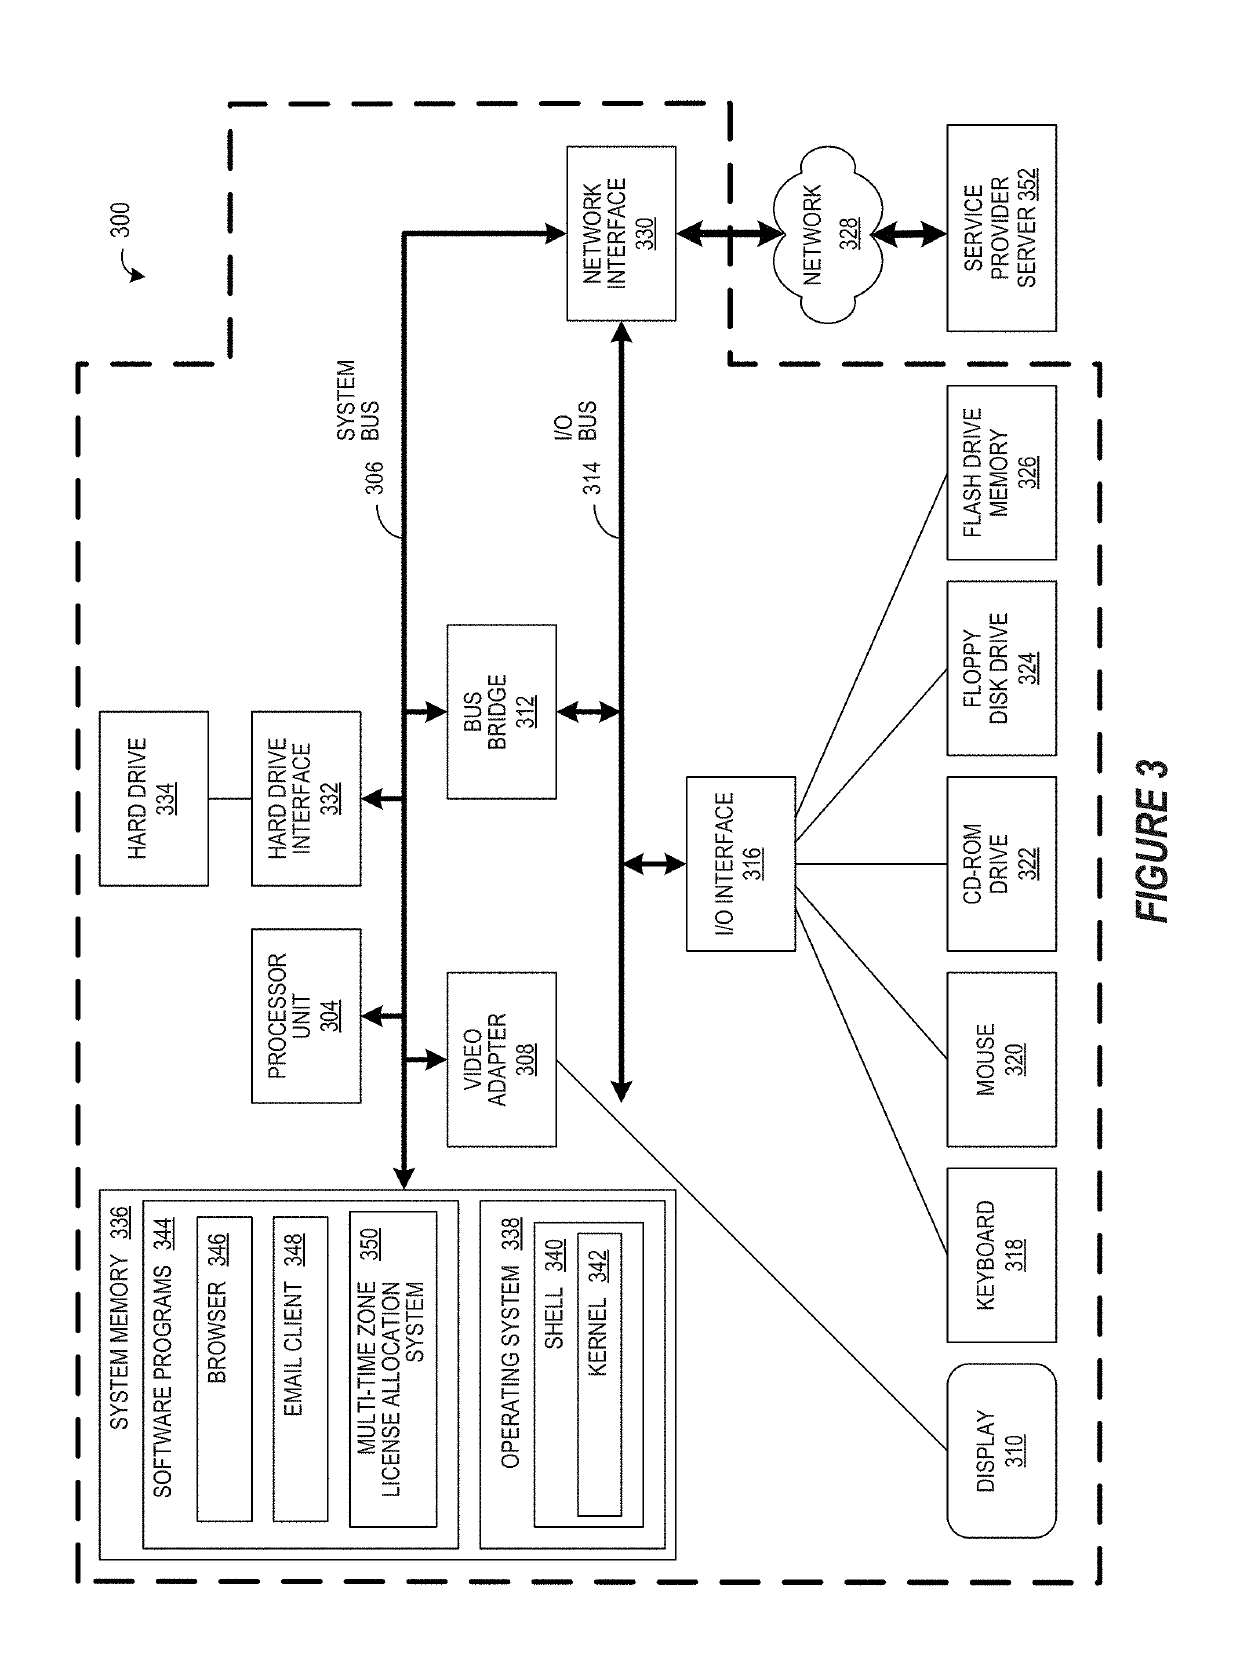 Global License Spanning Multiple Timezones in a Rate-Based System